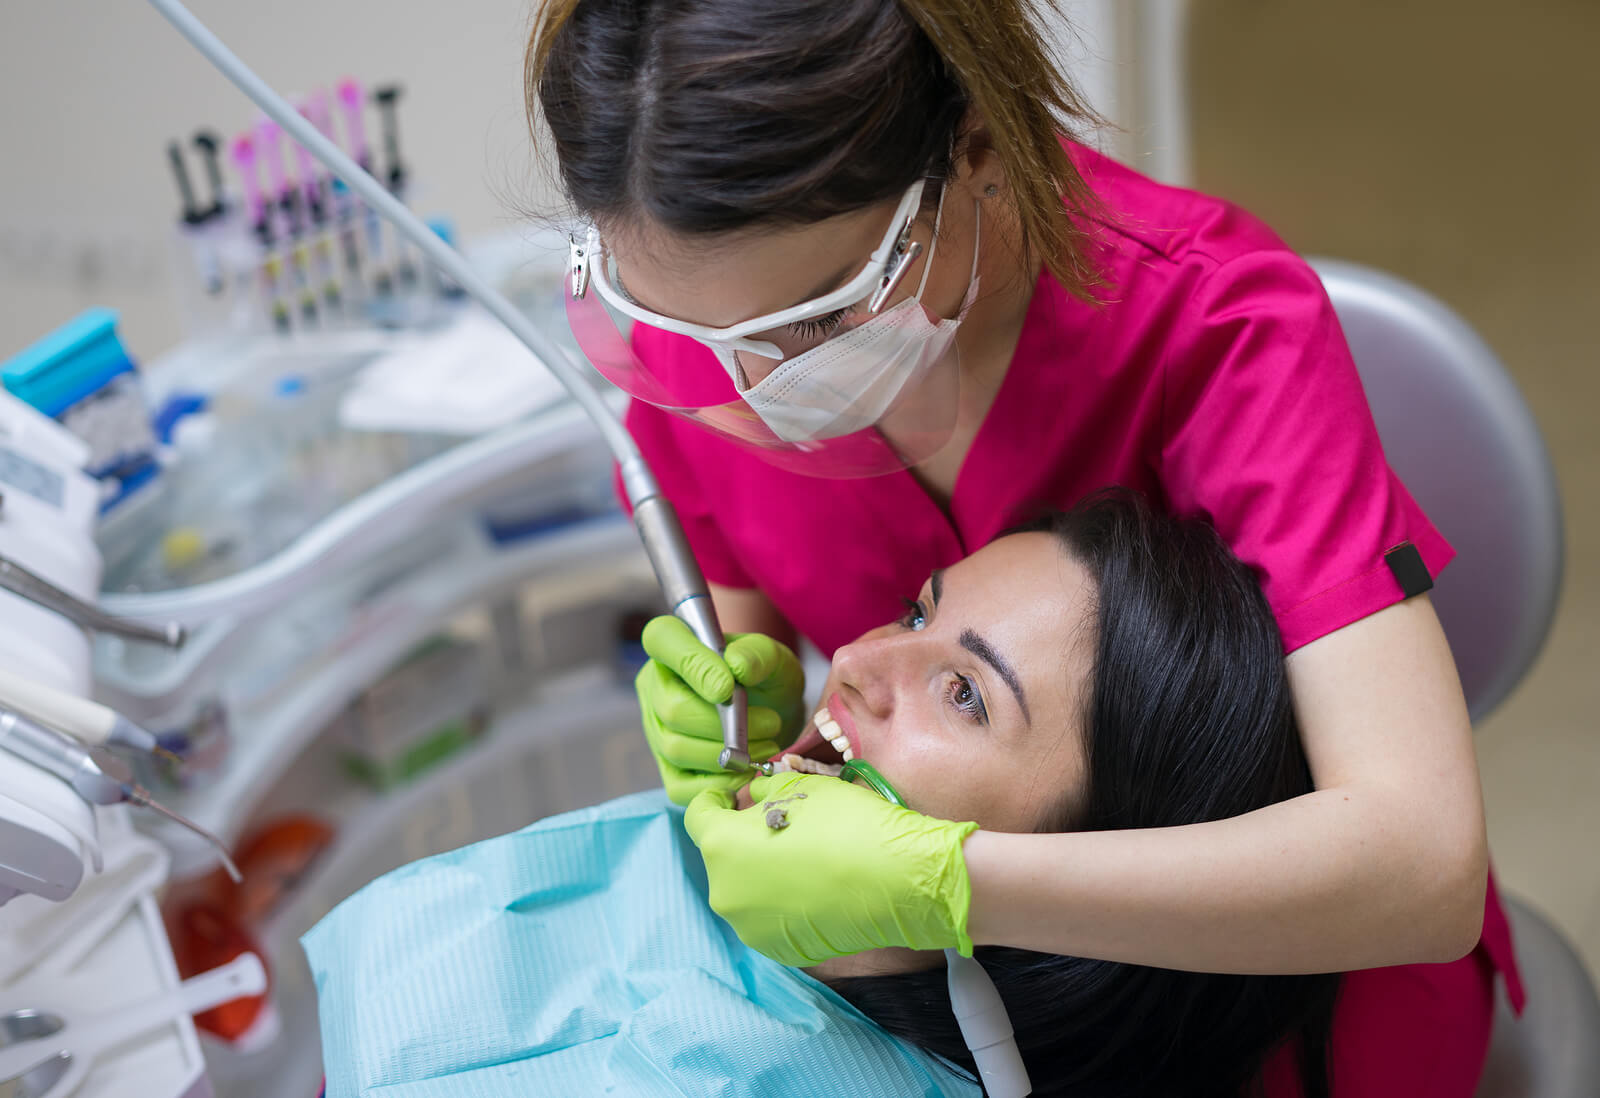 professional dental cleaning